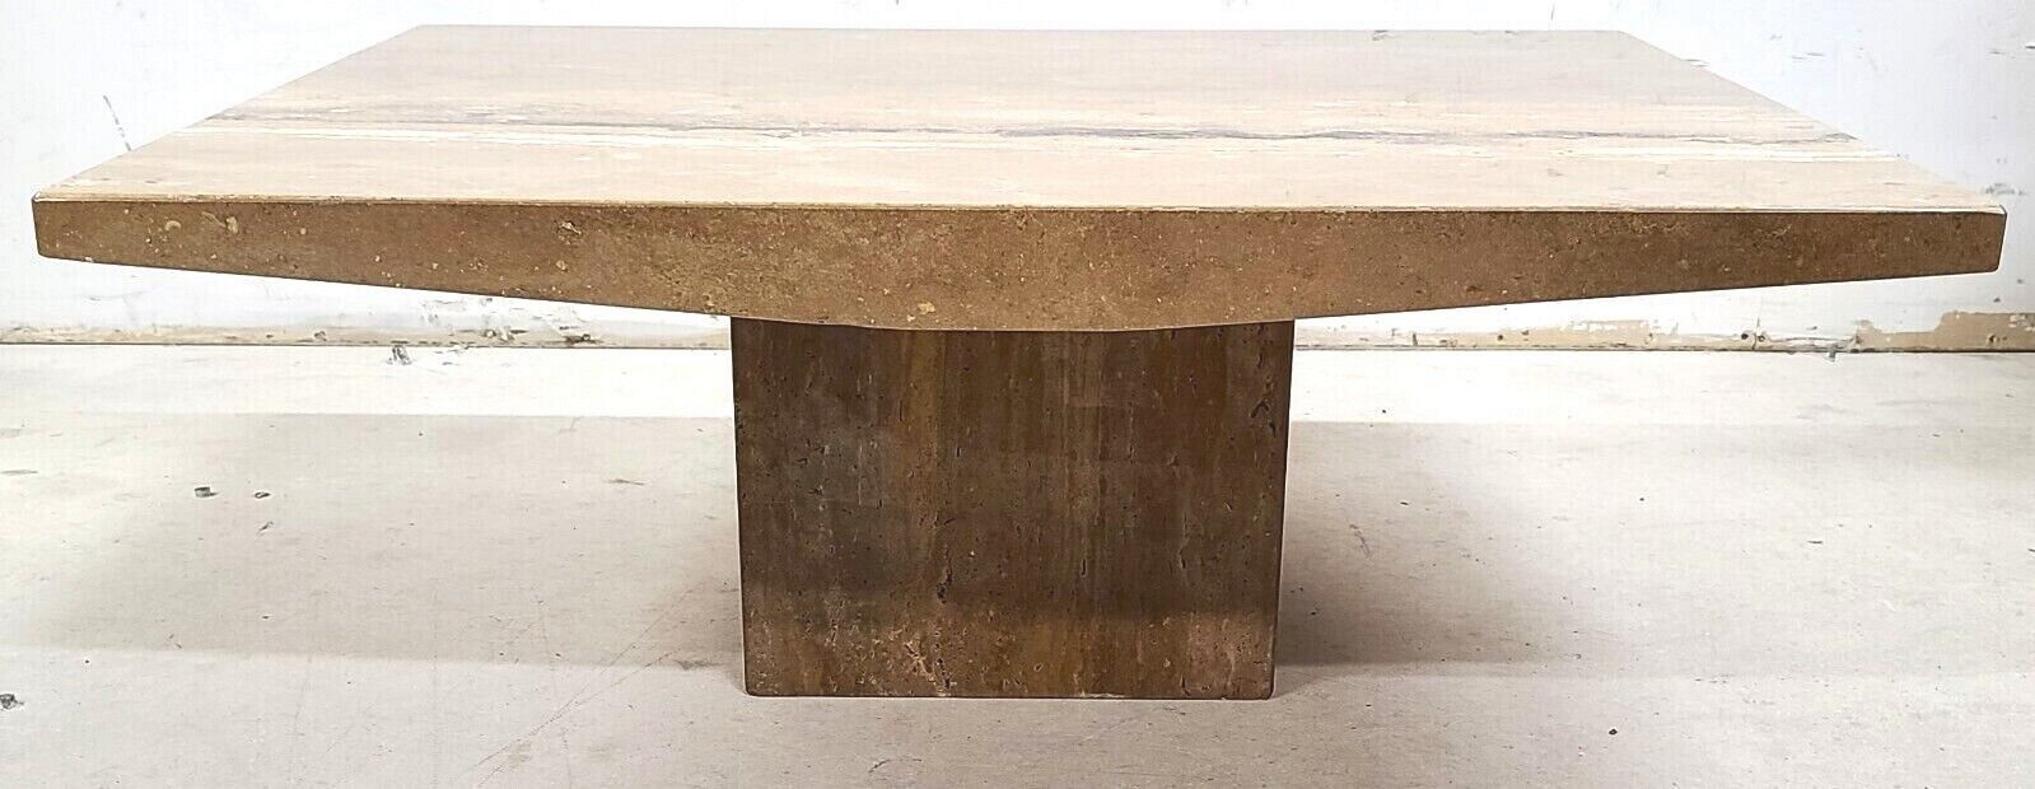 Offering one of our recent palm beach estate fine furniture acquisitions of a
Italian walnut travertine marble coffee cocktail table by Stone International
The spectacular natural appearance of the marble makes it look like the surface of an alien